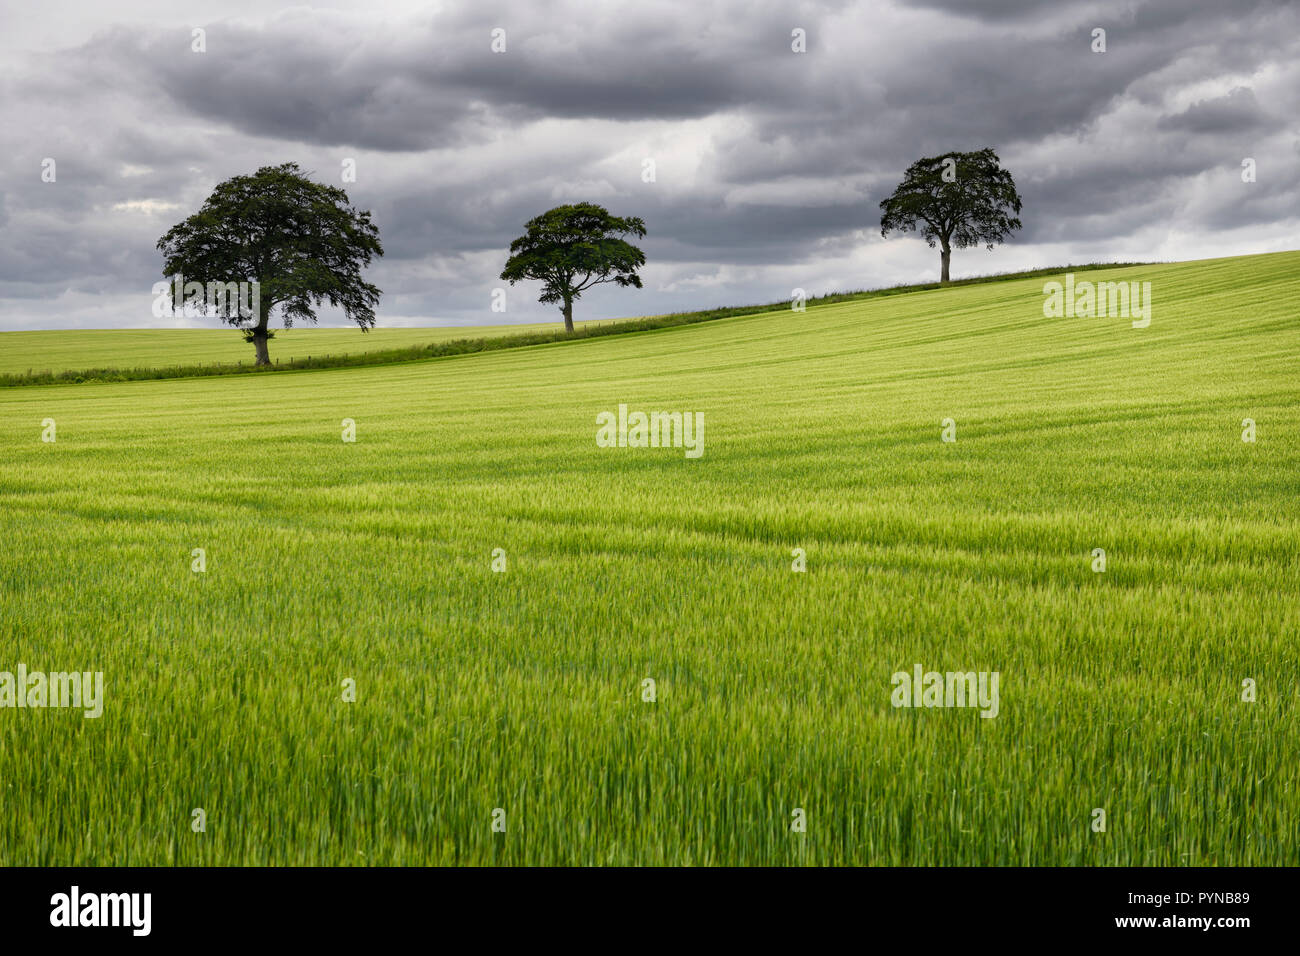 Rolling field of green wheat crop with three trees on Highway B6460 near Duns Scottish Borders Scotland UK Stock Photo